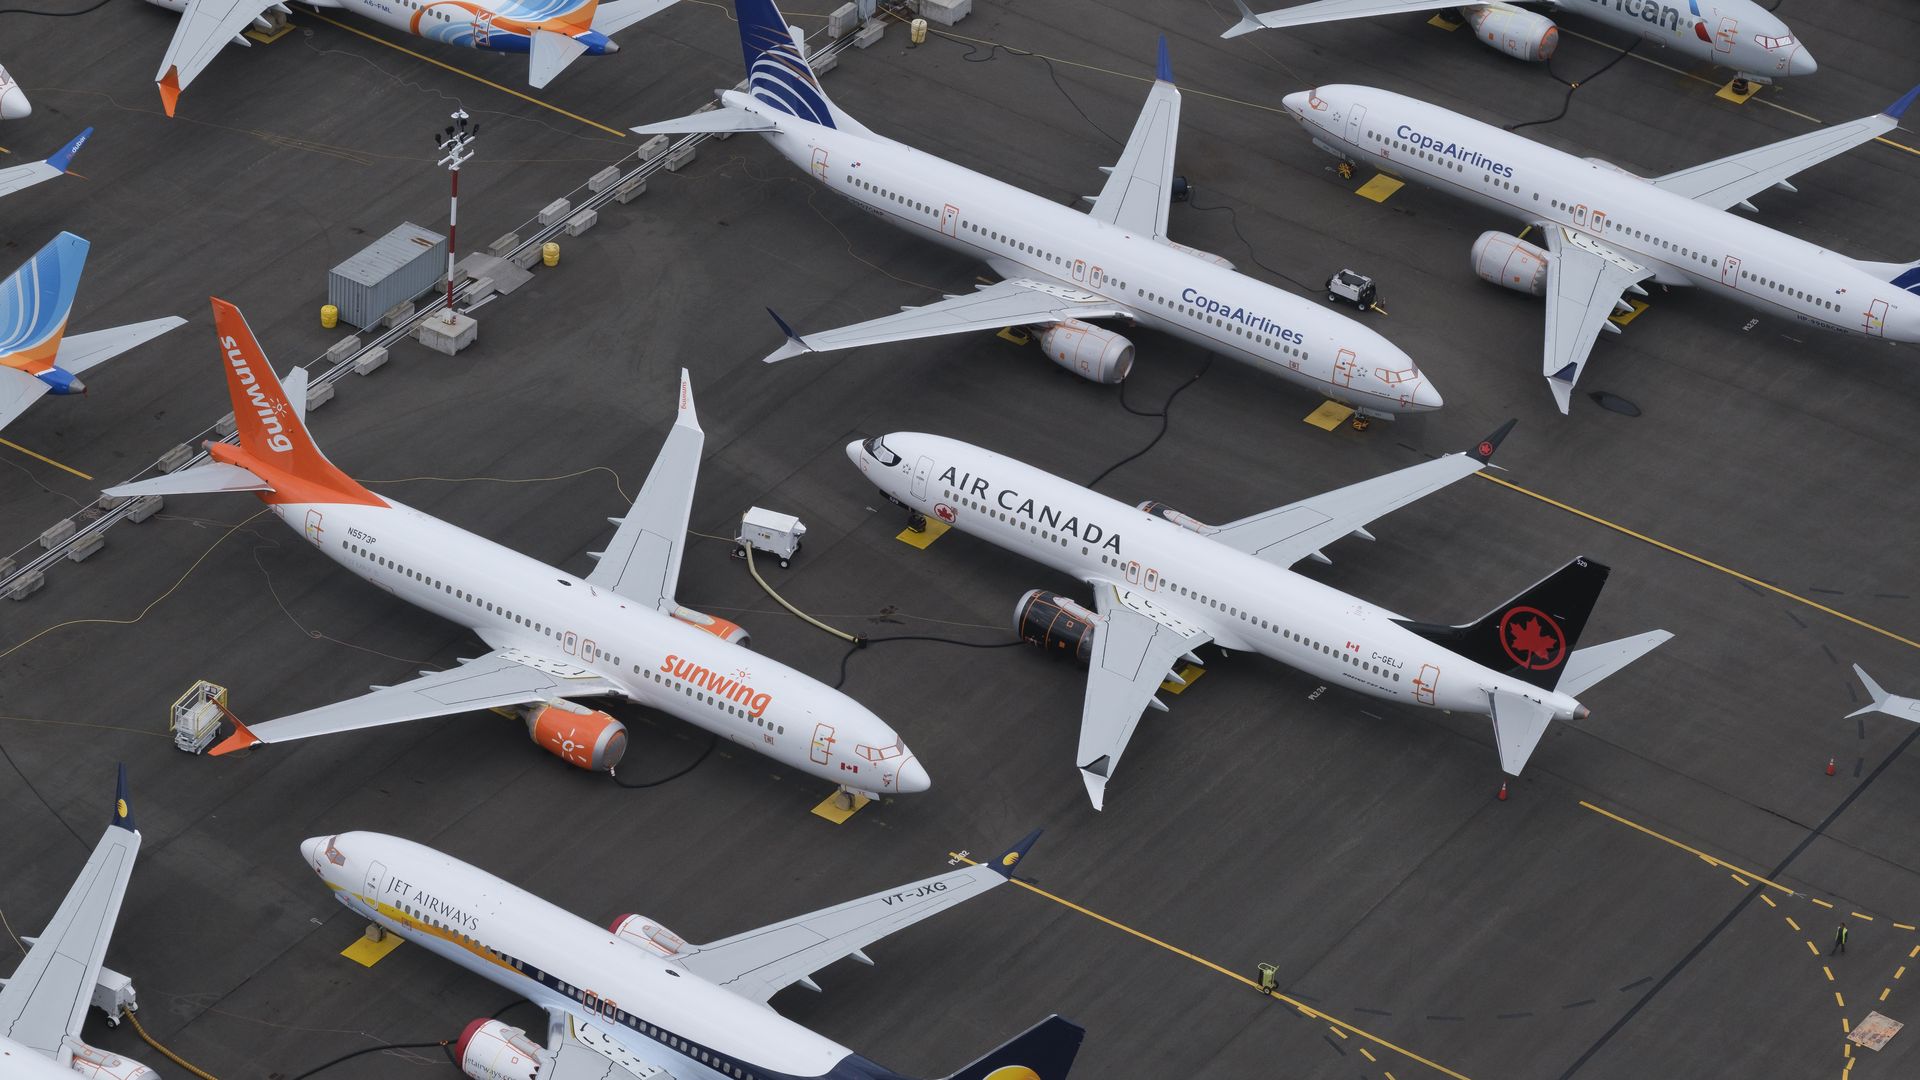 Boeing 737 MAX airplanes are stored in a parking lot